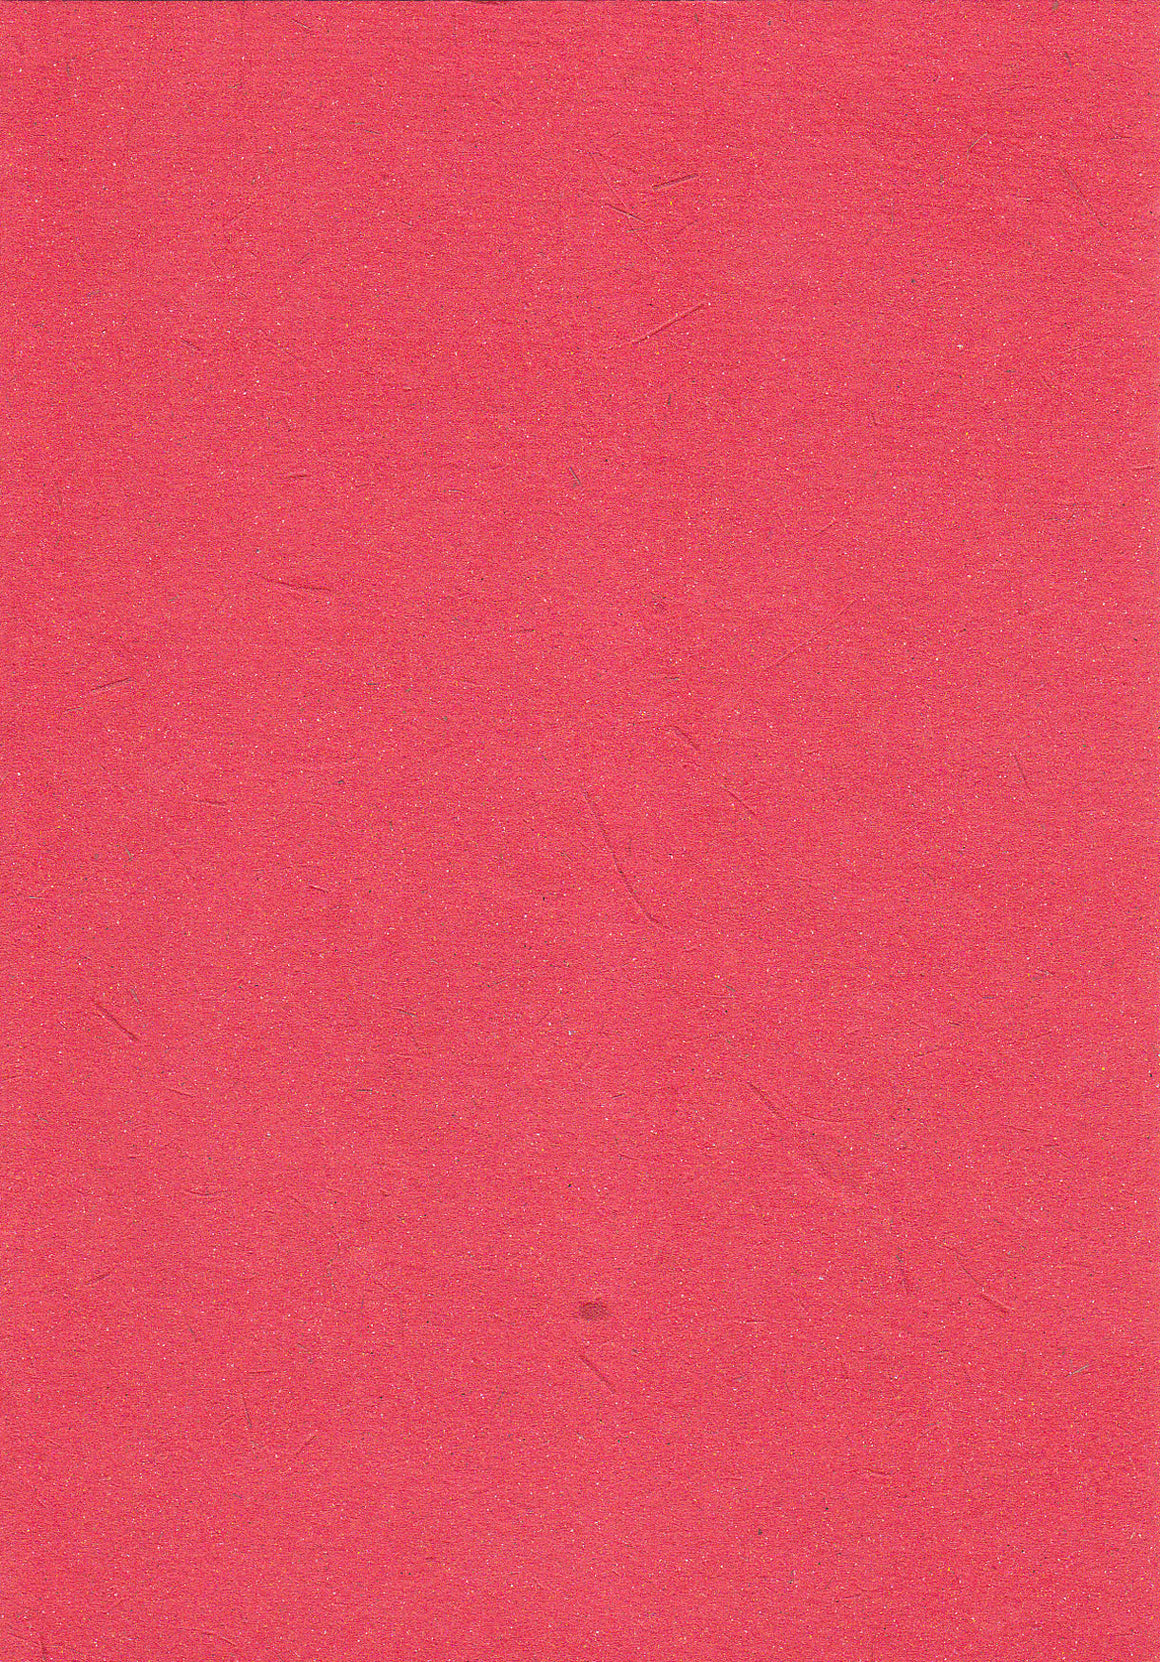 Red textured paper